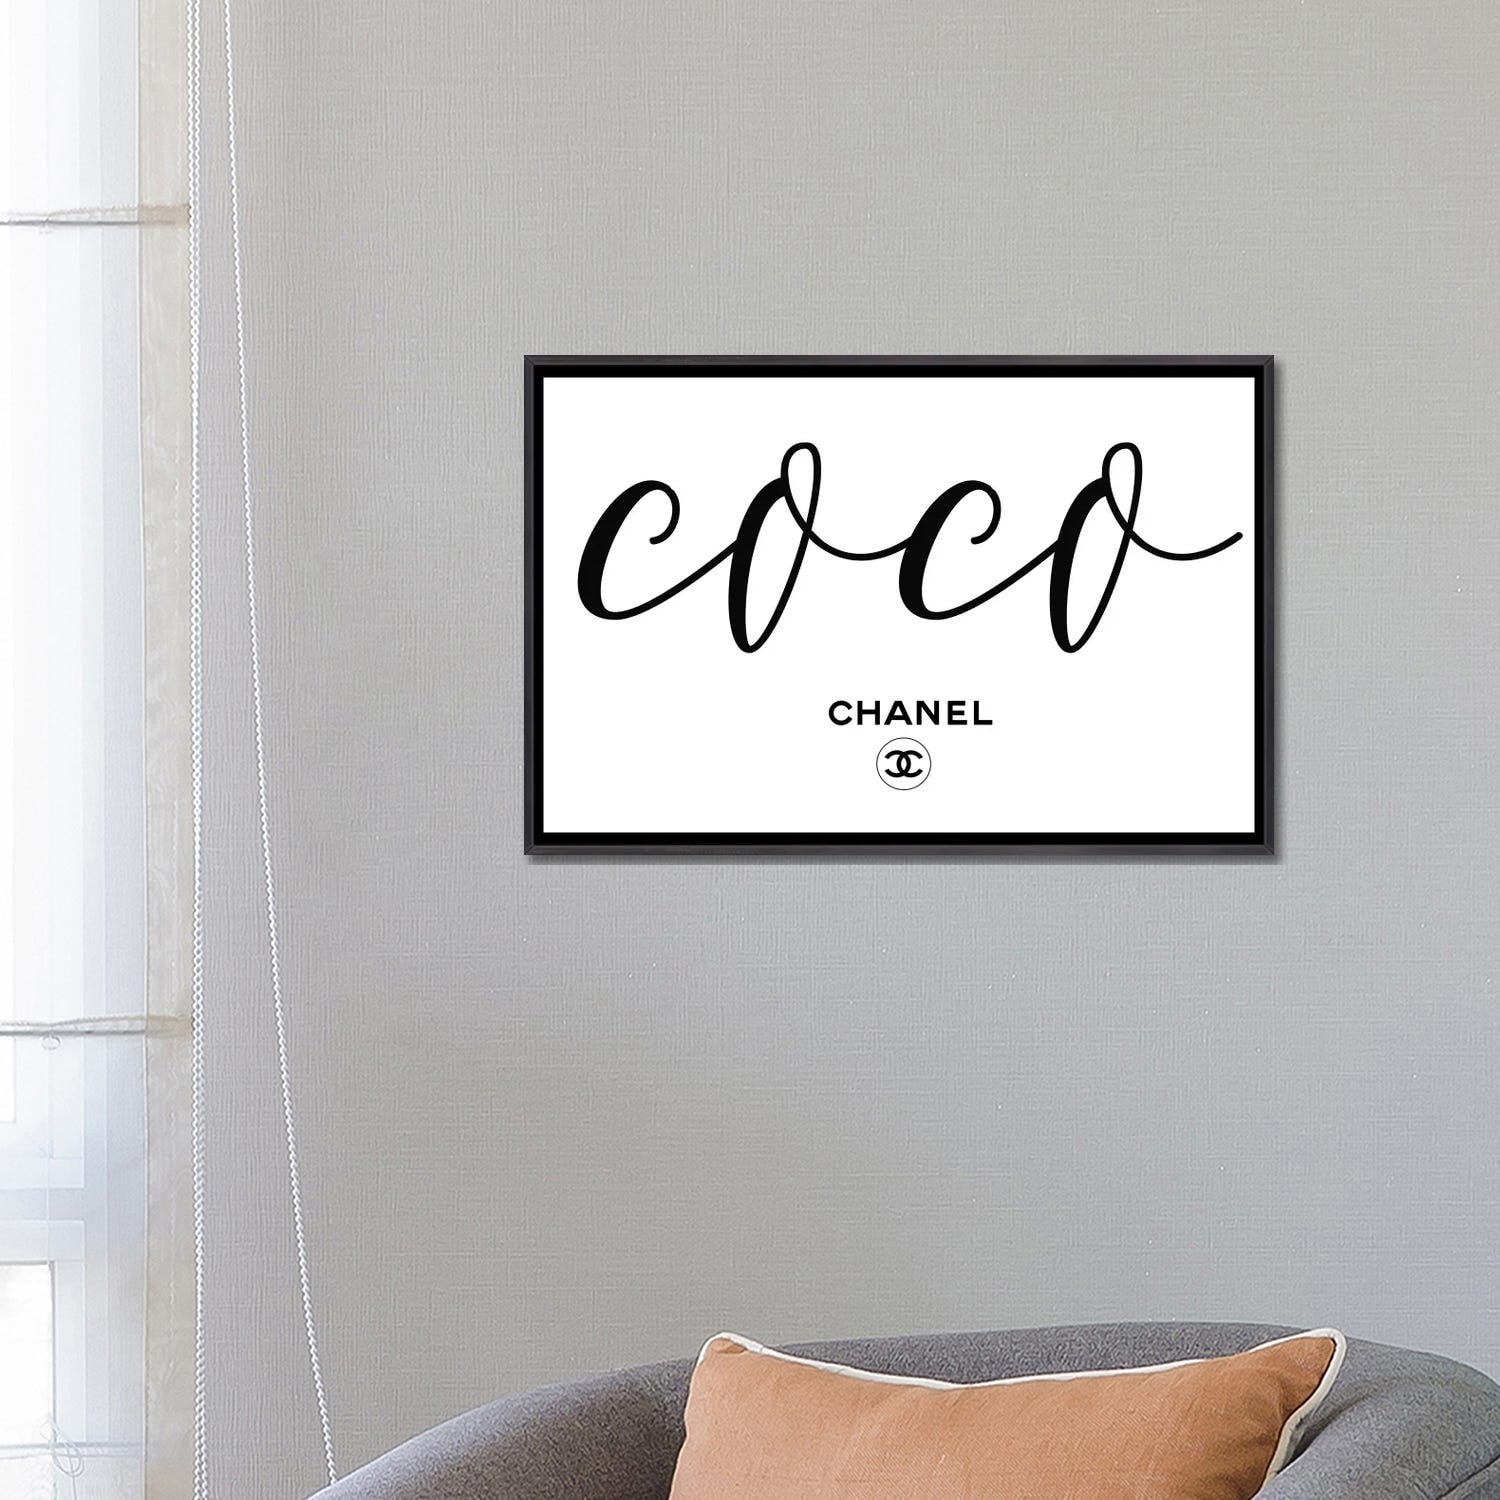 Coco Chanel by Natasha Mylius - Wrapped Canvas Painting Print East Urban Home Size: 8 H x 12 W x 0.75 D